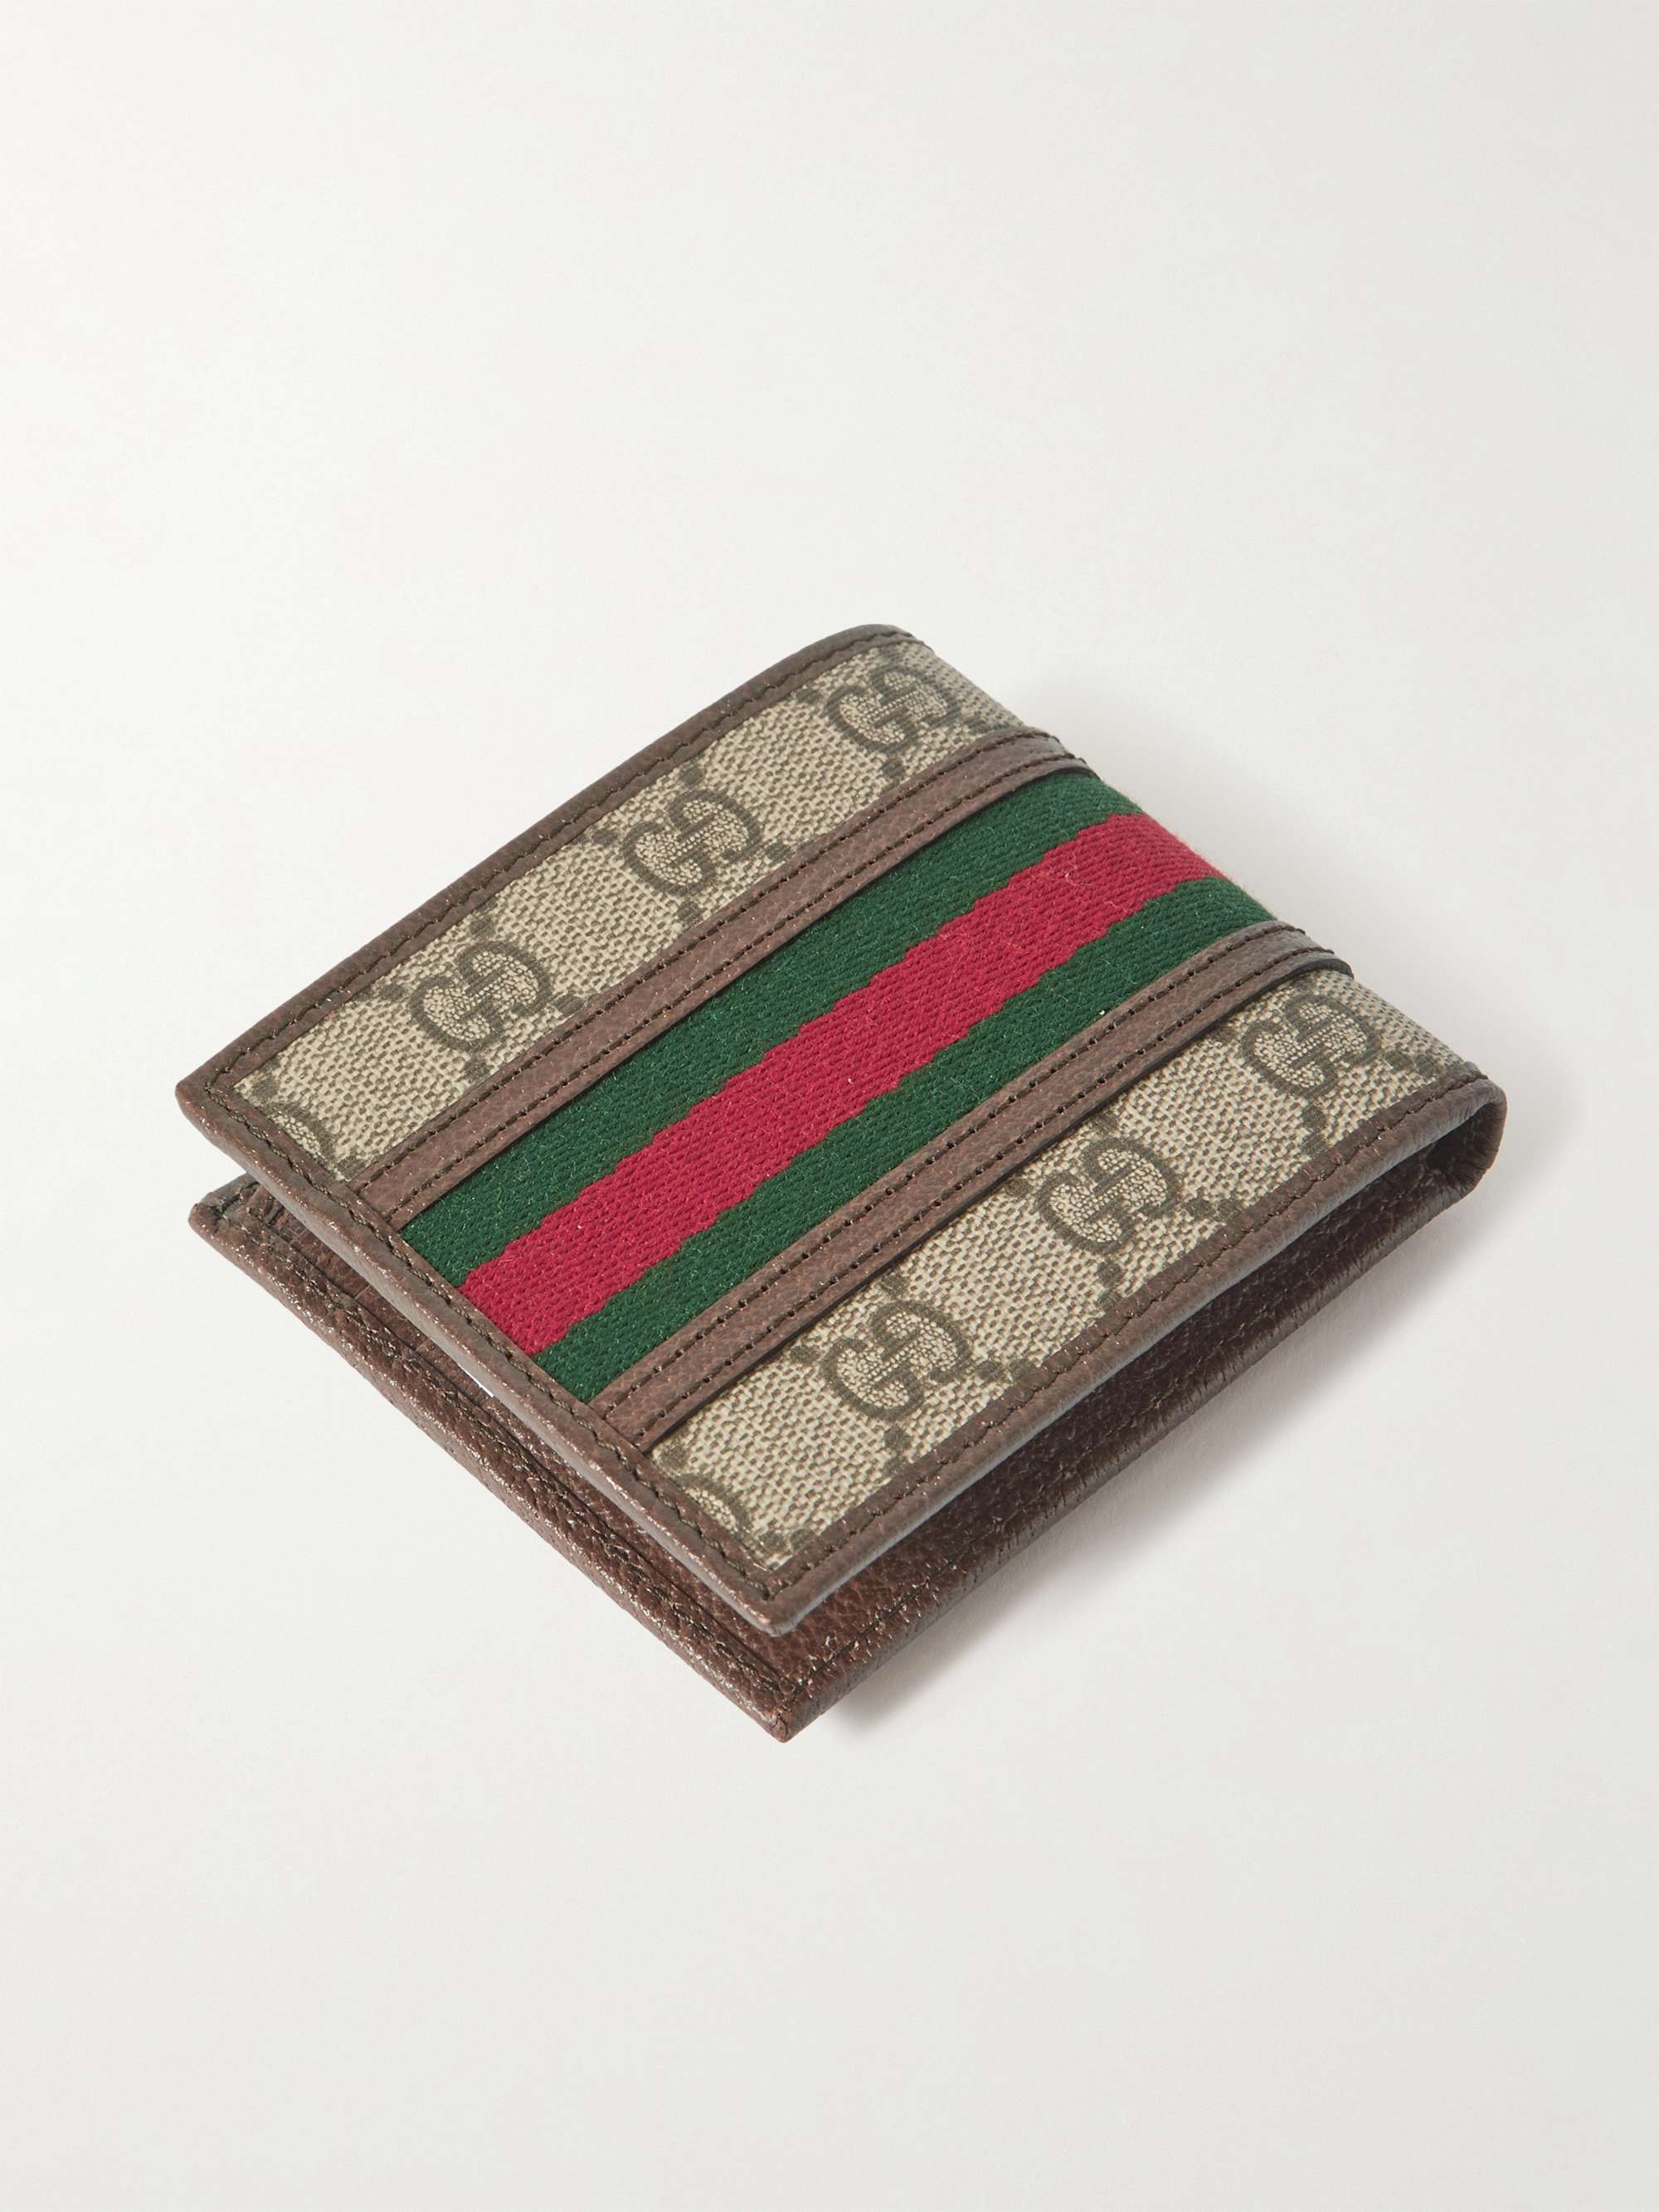 GUCCI Ophidia Webbing-Trimmed Monogrammed Coated-Canvas and Leather Billfold Wallet